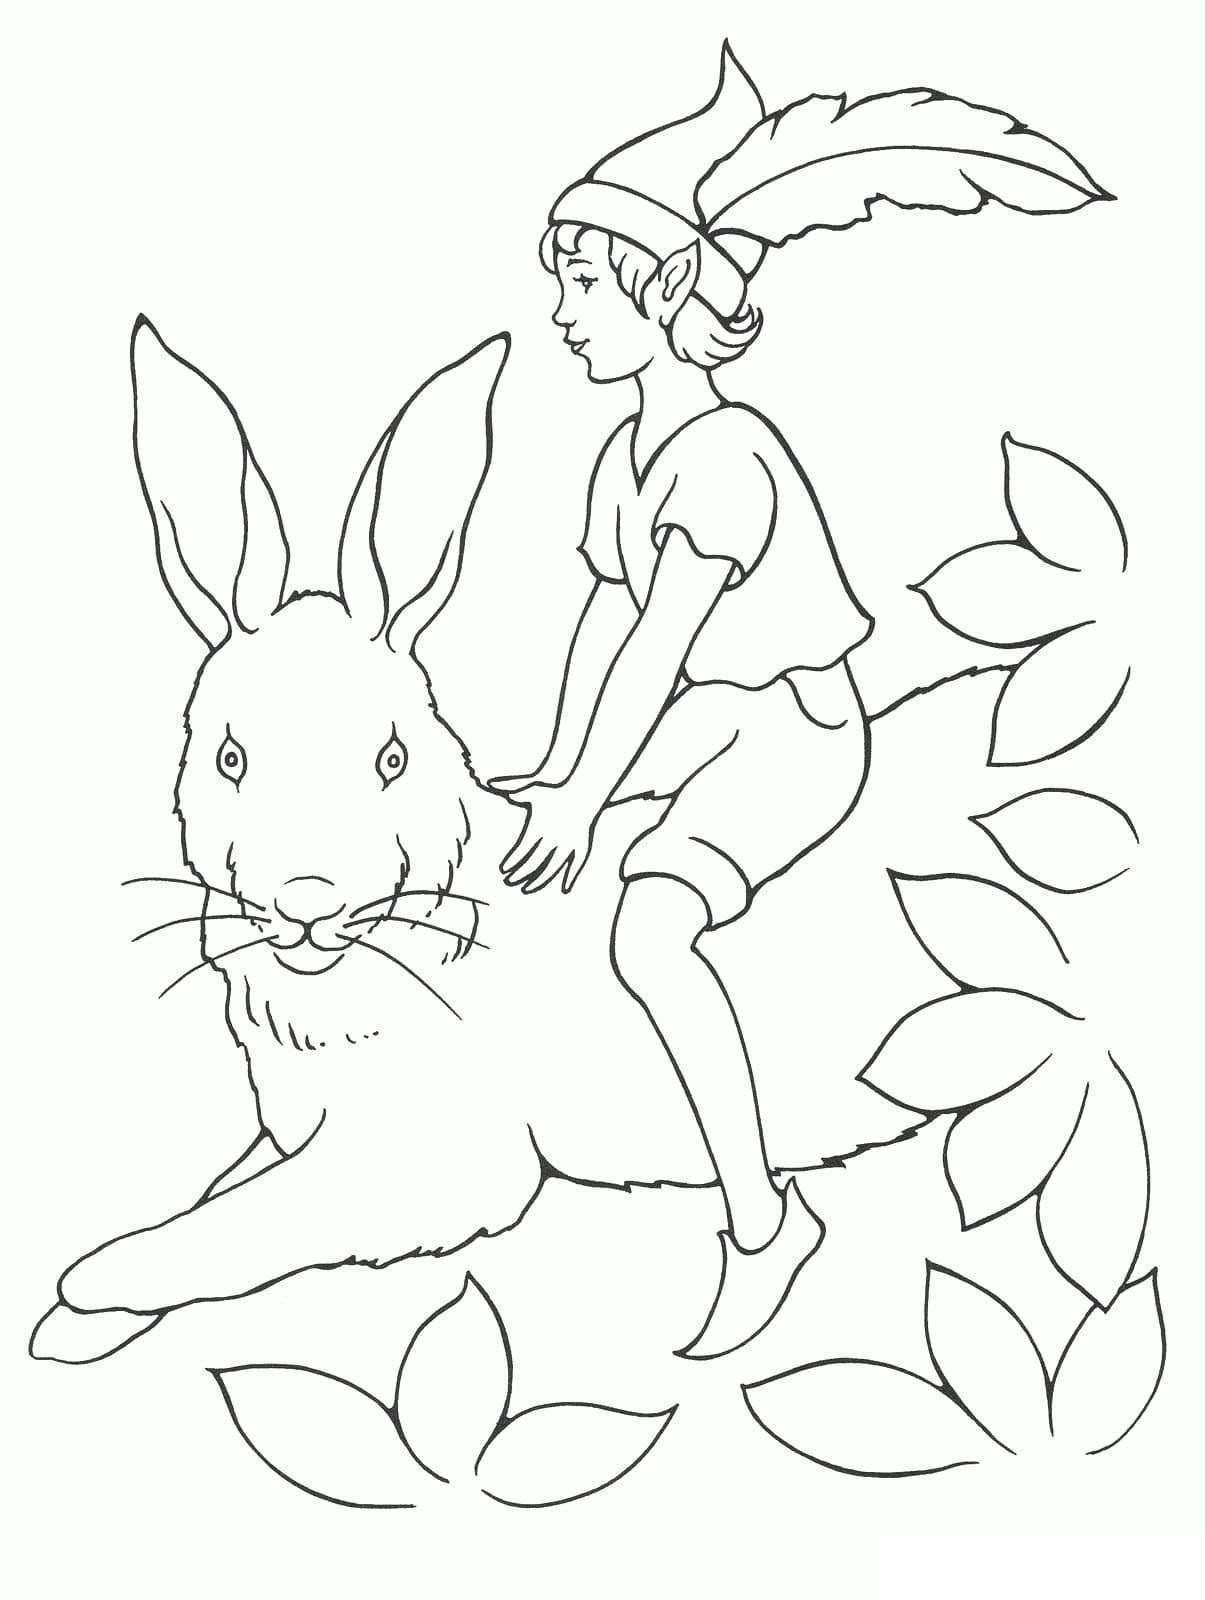 Elfe et Lapin coloring page